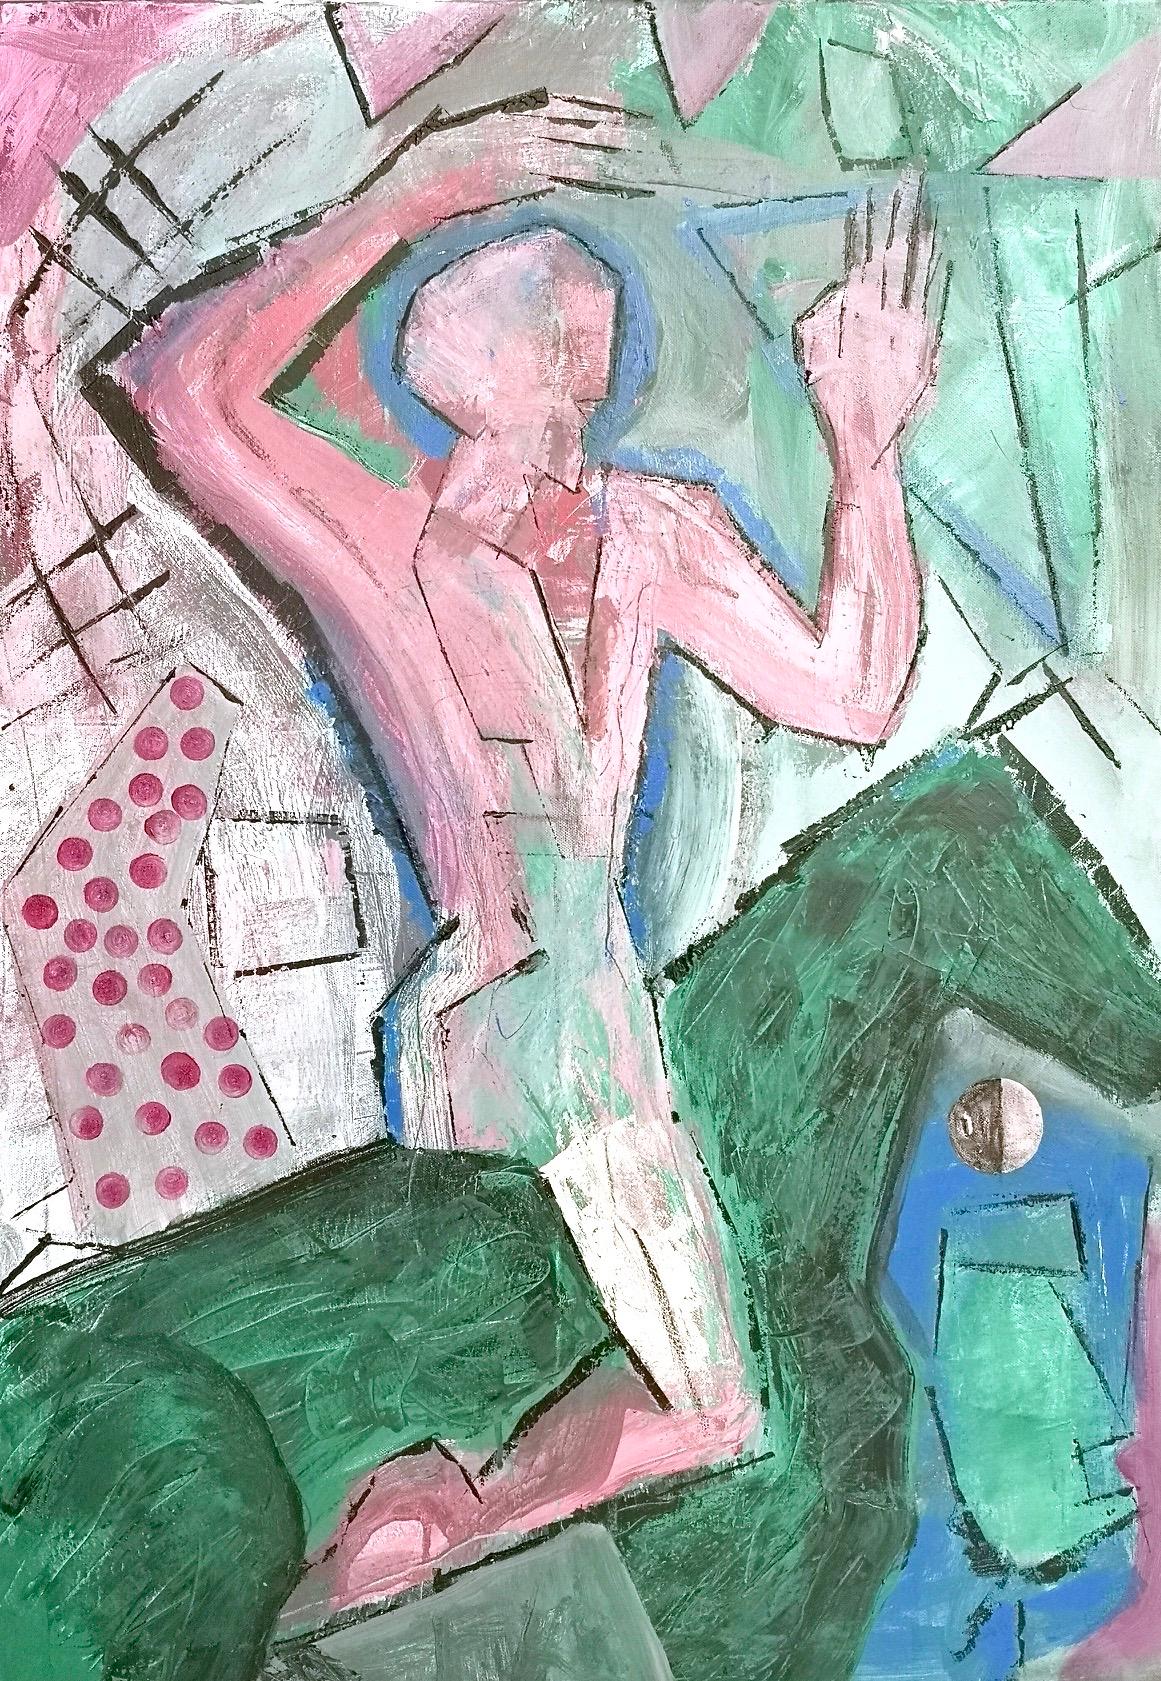 "Cavaliere rosa" by Enzio Wenk, 2019 -Pink Figure, Acrylic, Neo-Expressionism